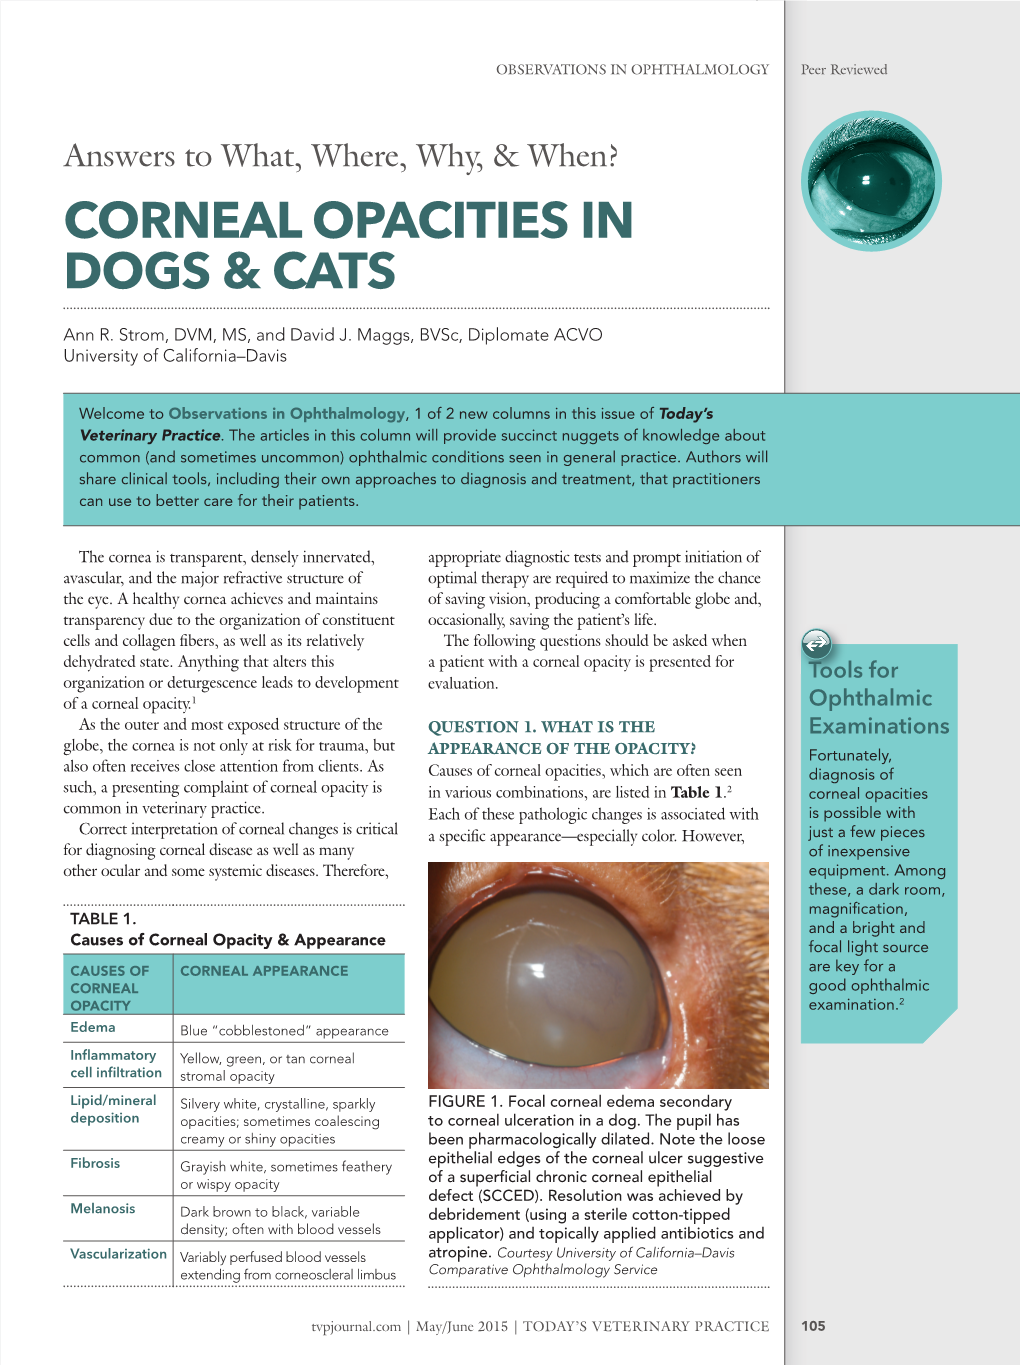 Corneal Opacities in Dogs & Cats